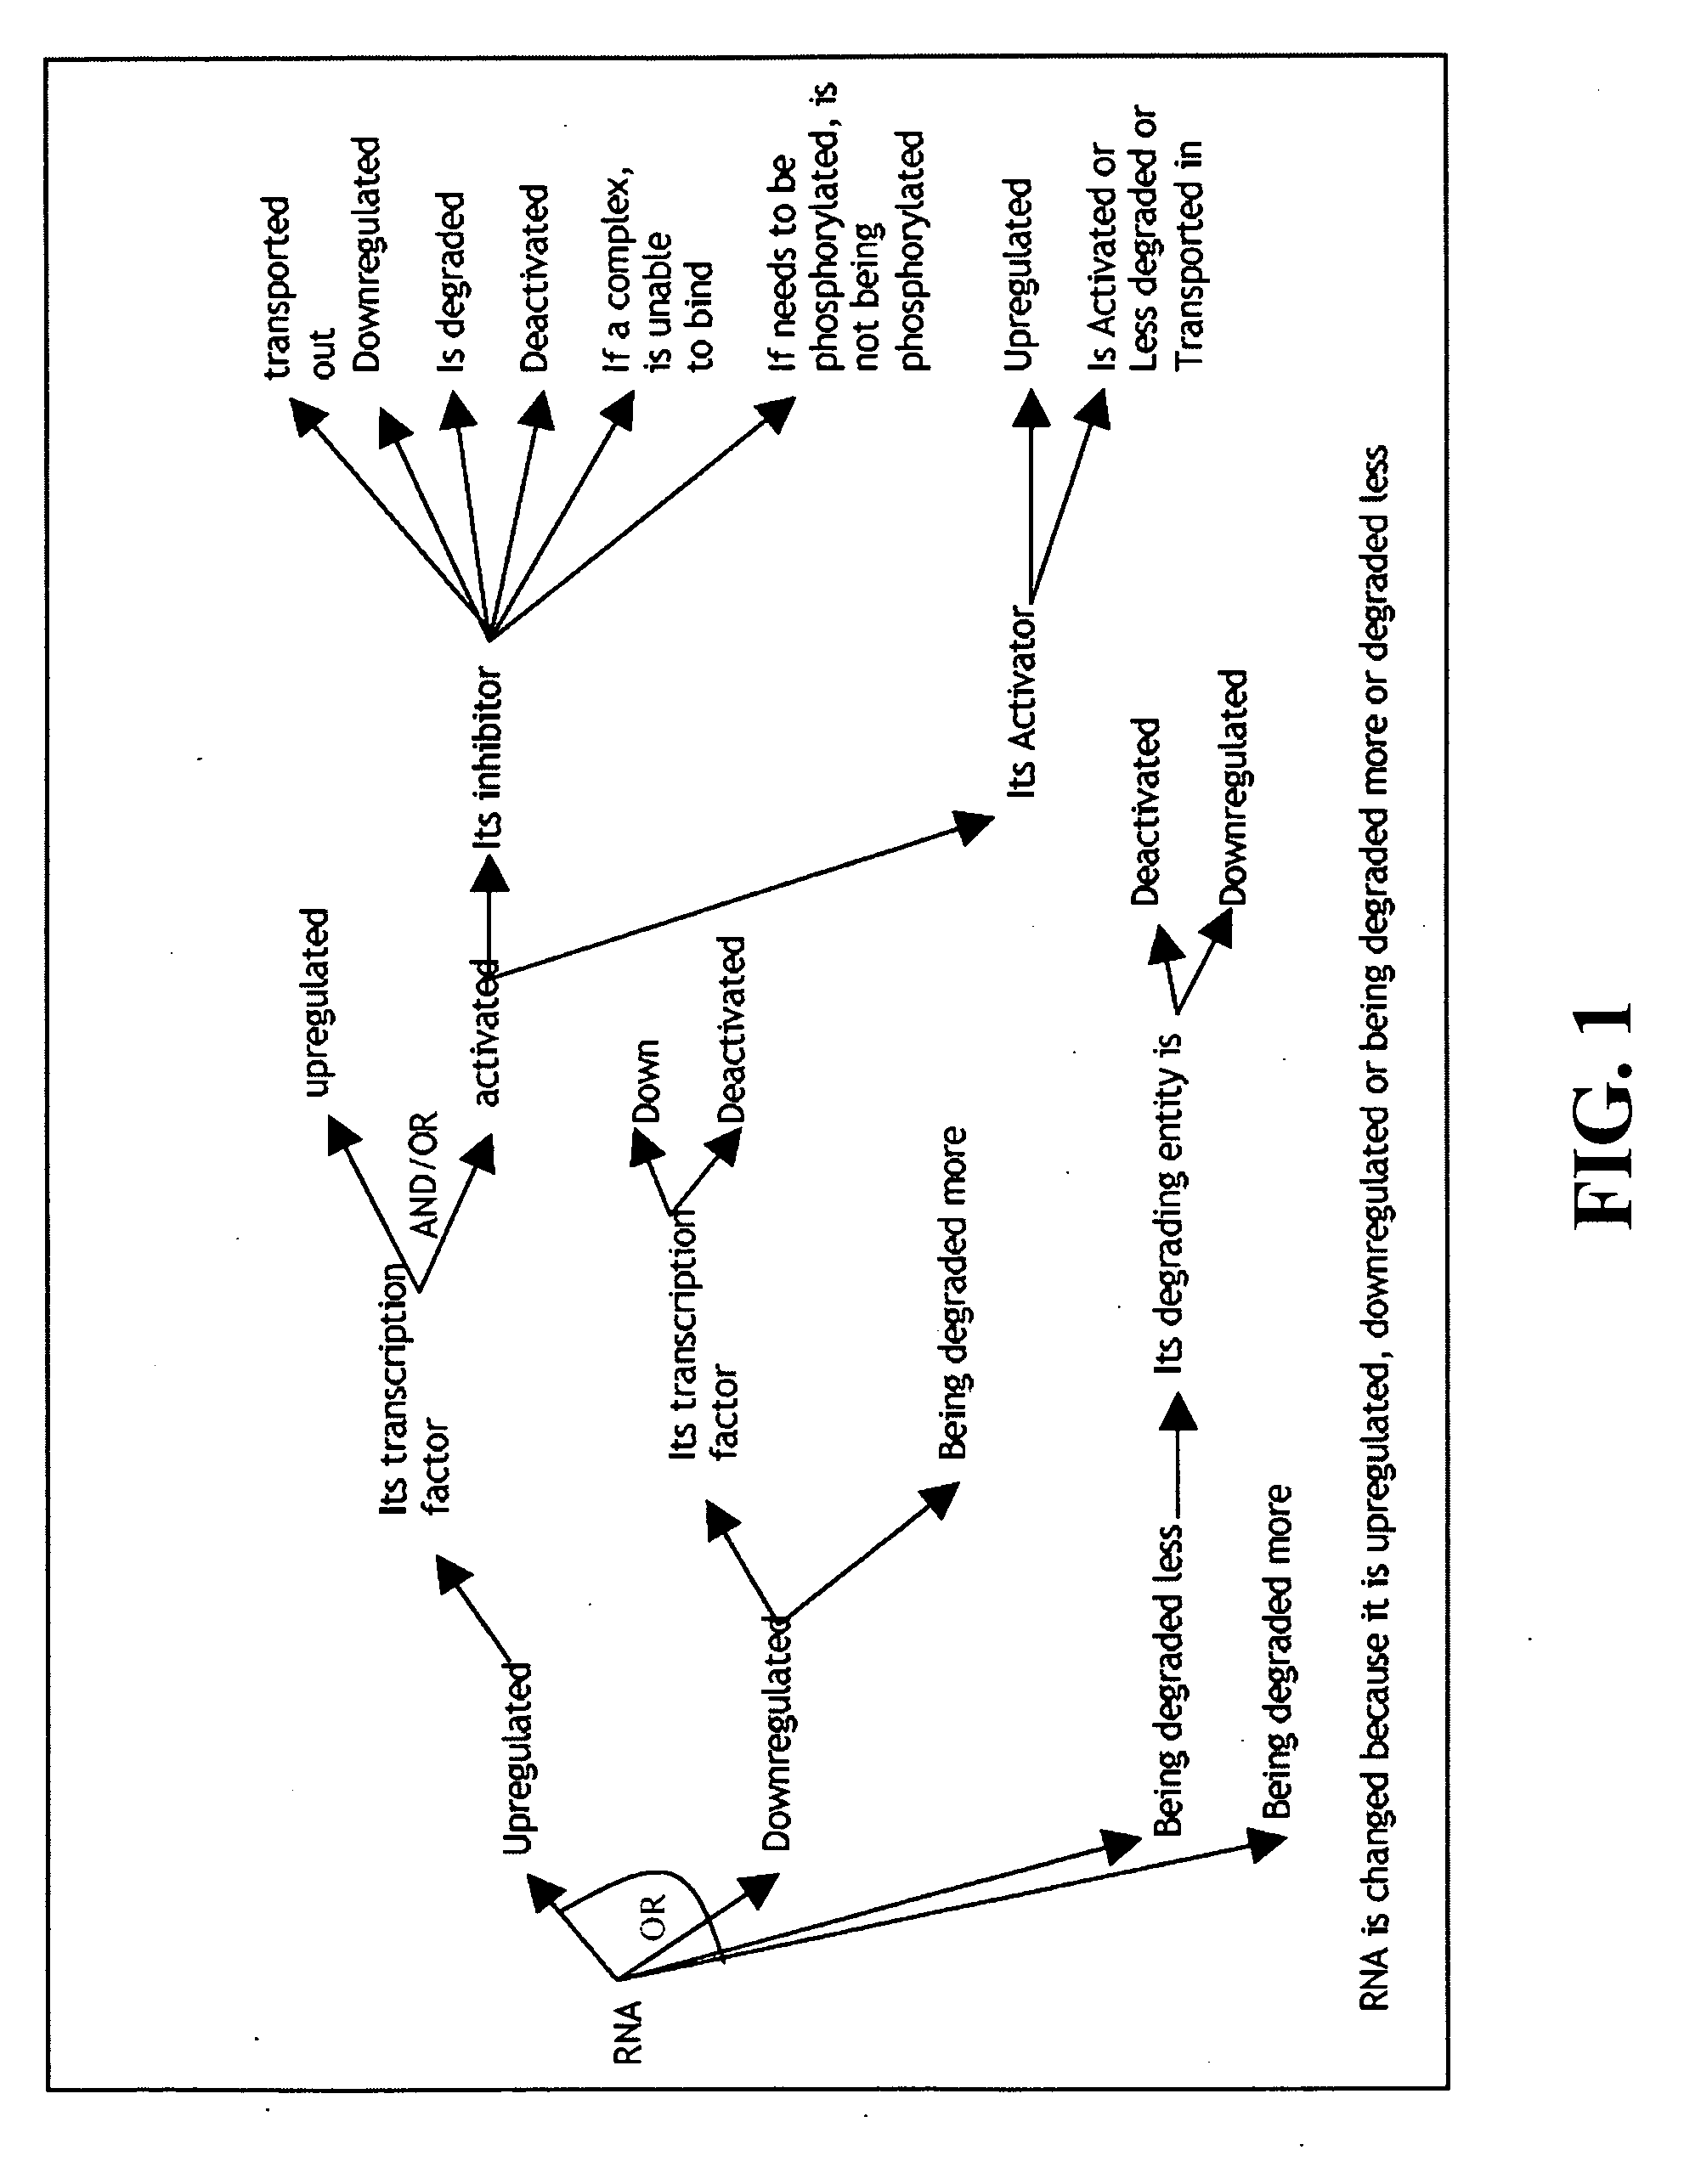 System, method and apparatus for causal implication analysis in biological networks